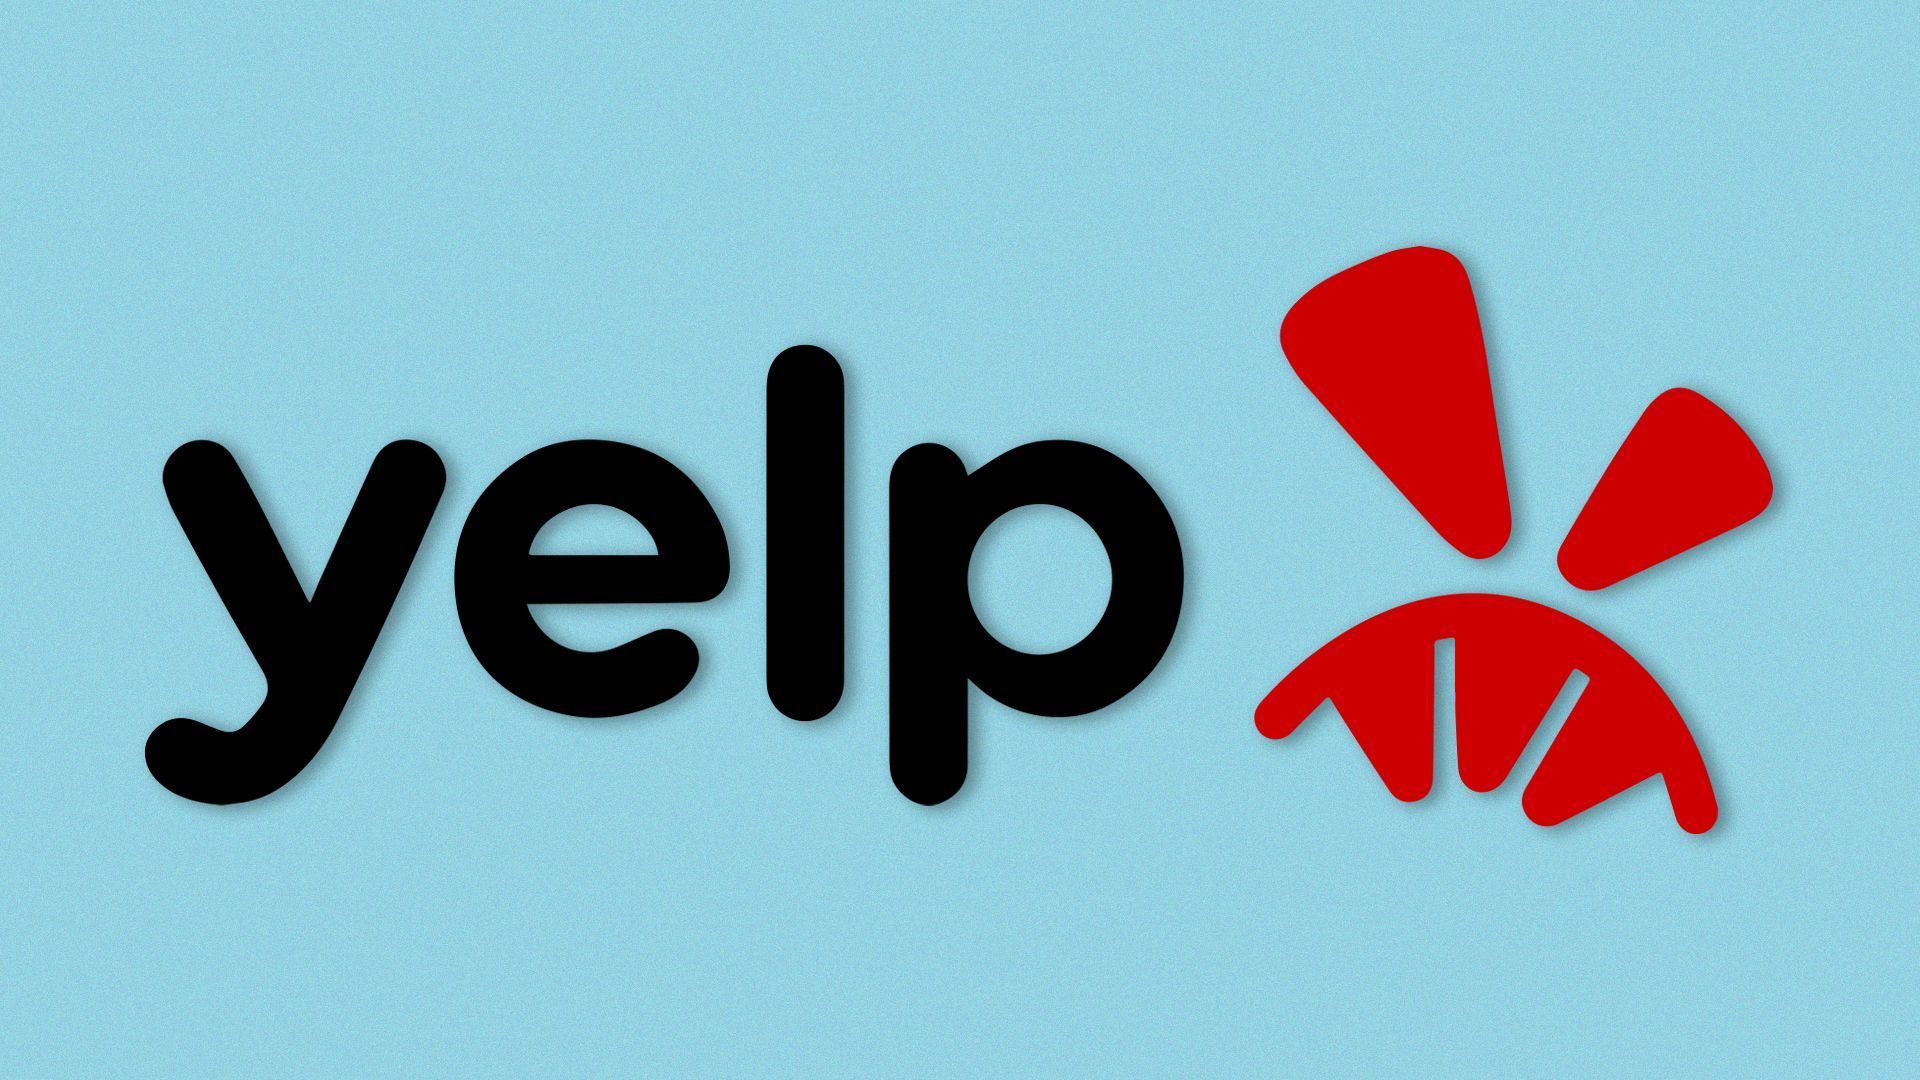 Illustration of Yelp logo with an angry face.